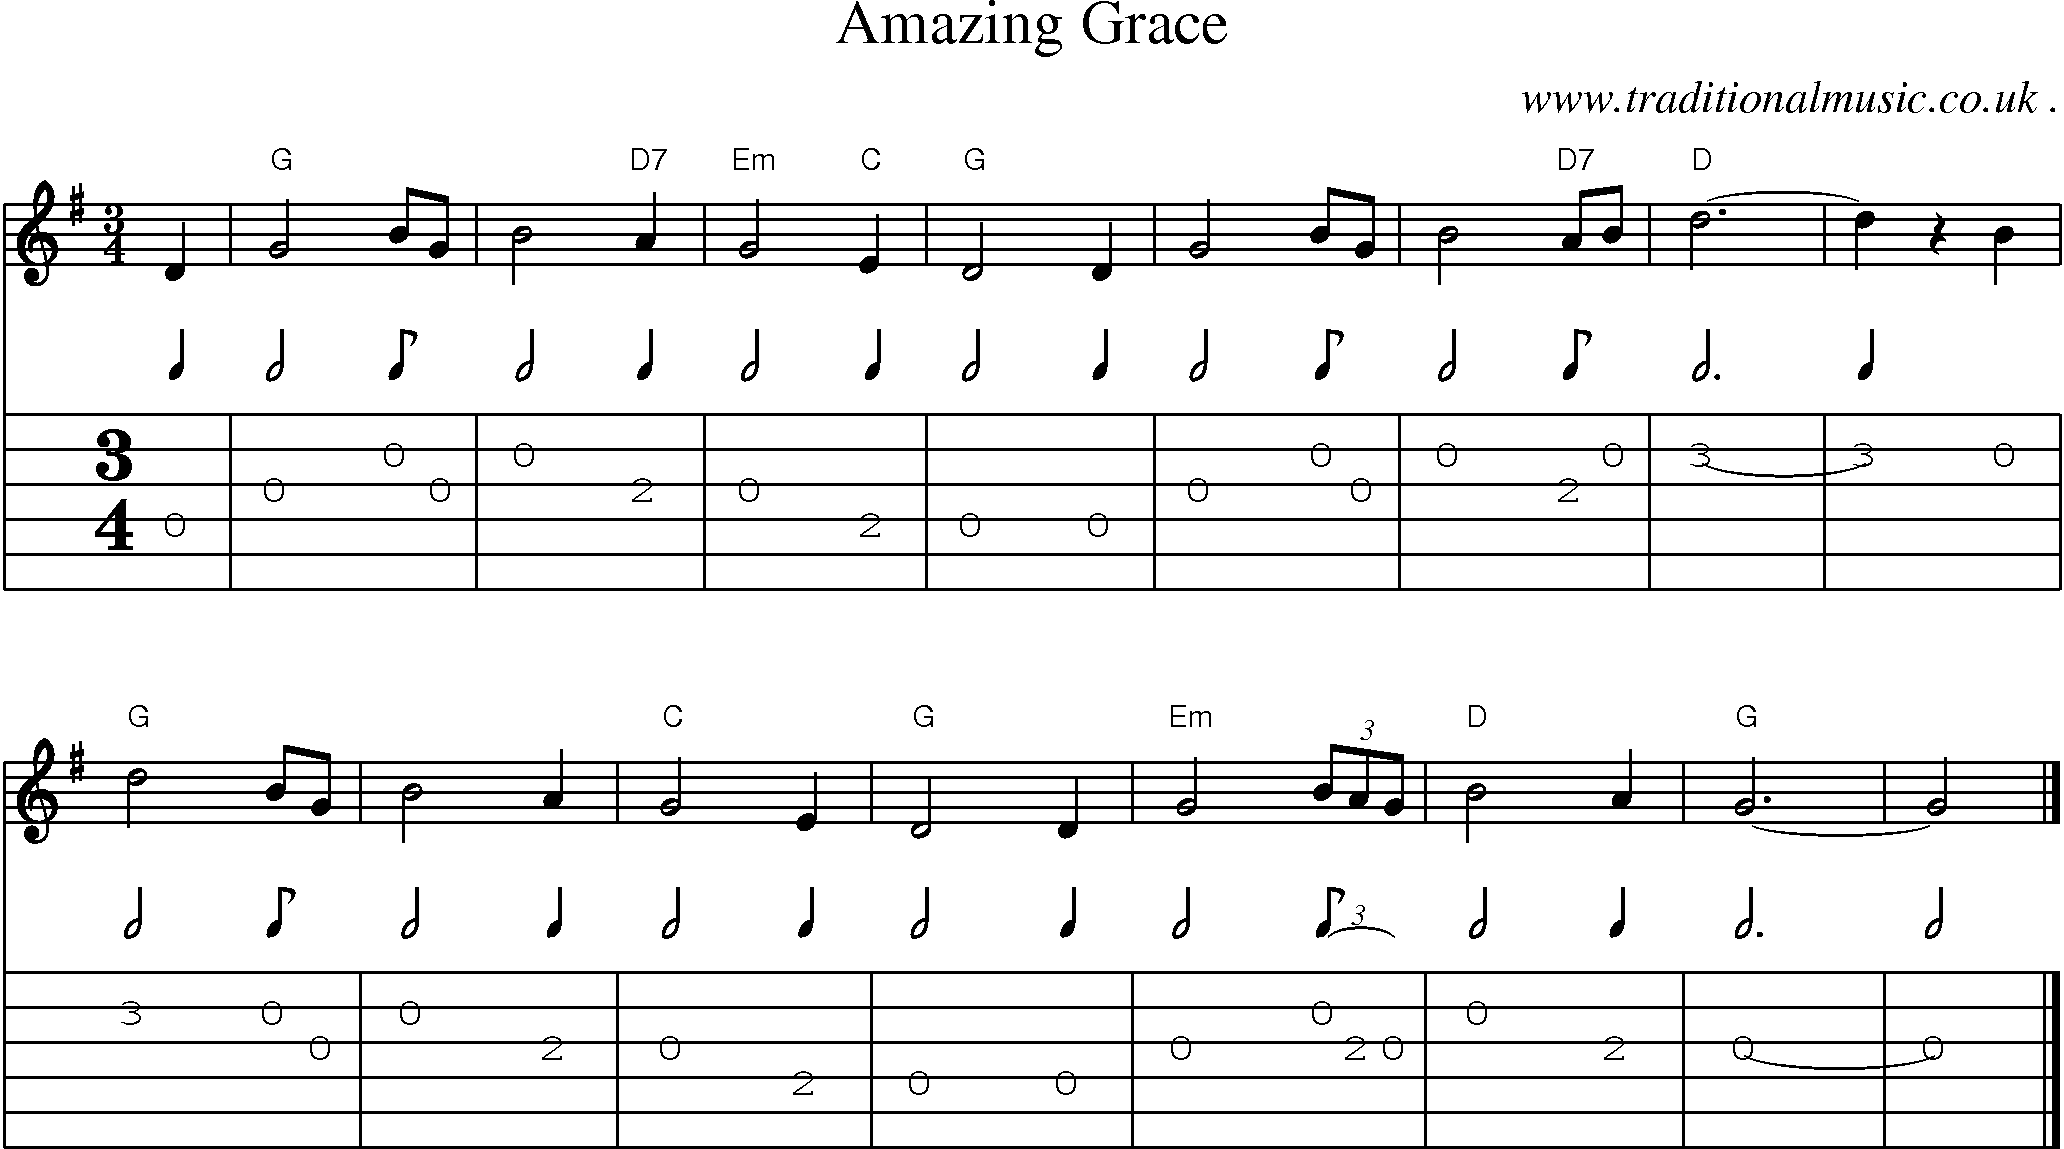 Music Score and Guitar Tabs for Amazing Grace